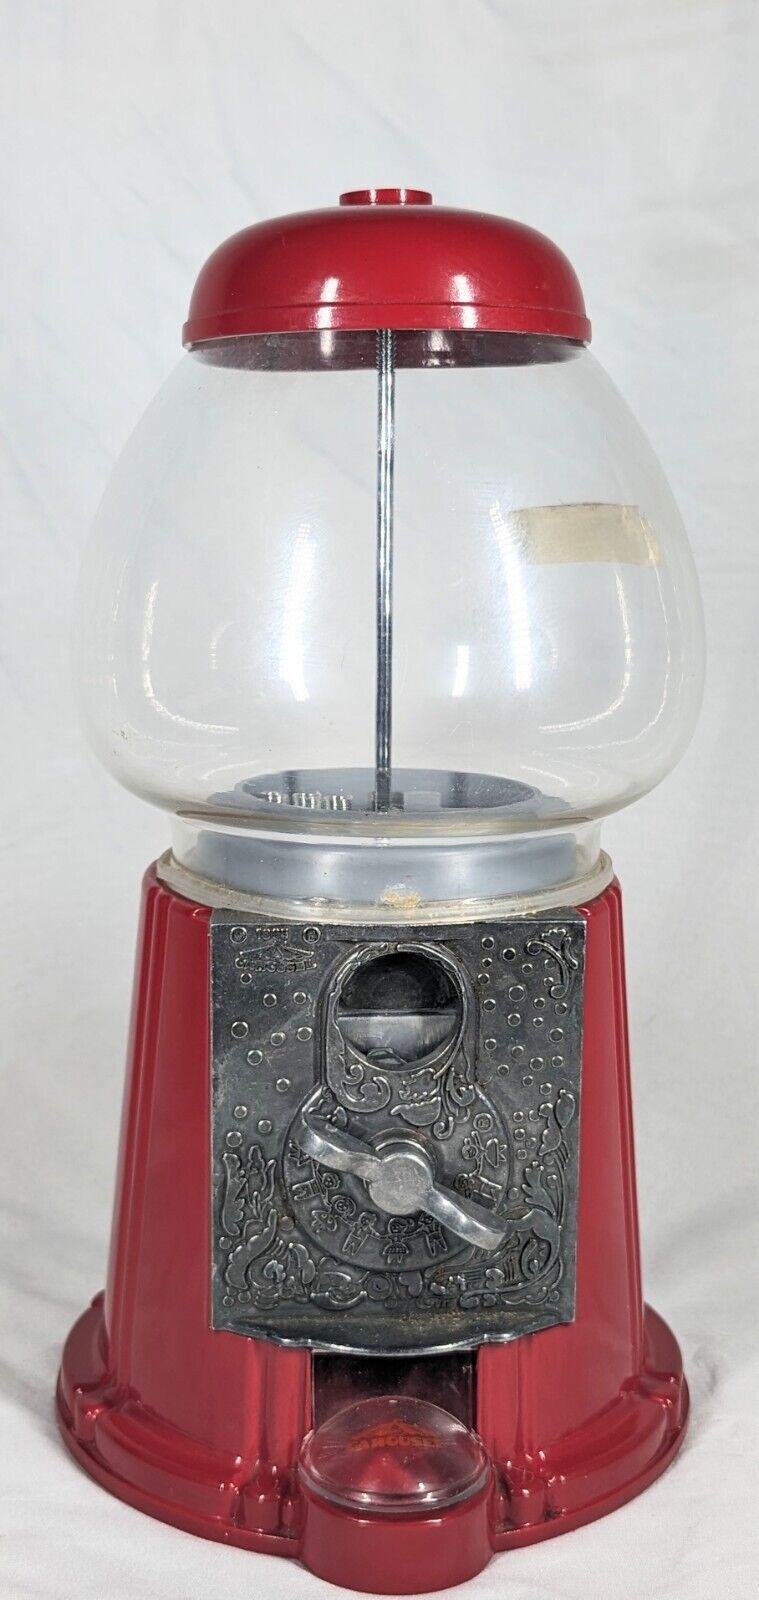 1985 Vintage Gumball Machine Red Carousel Division Glass Top Metal Base